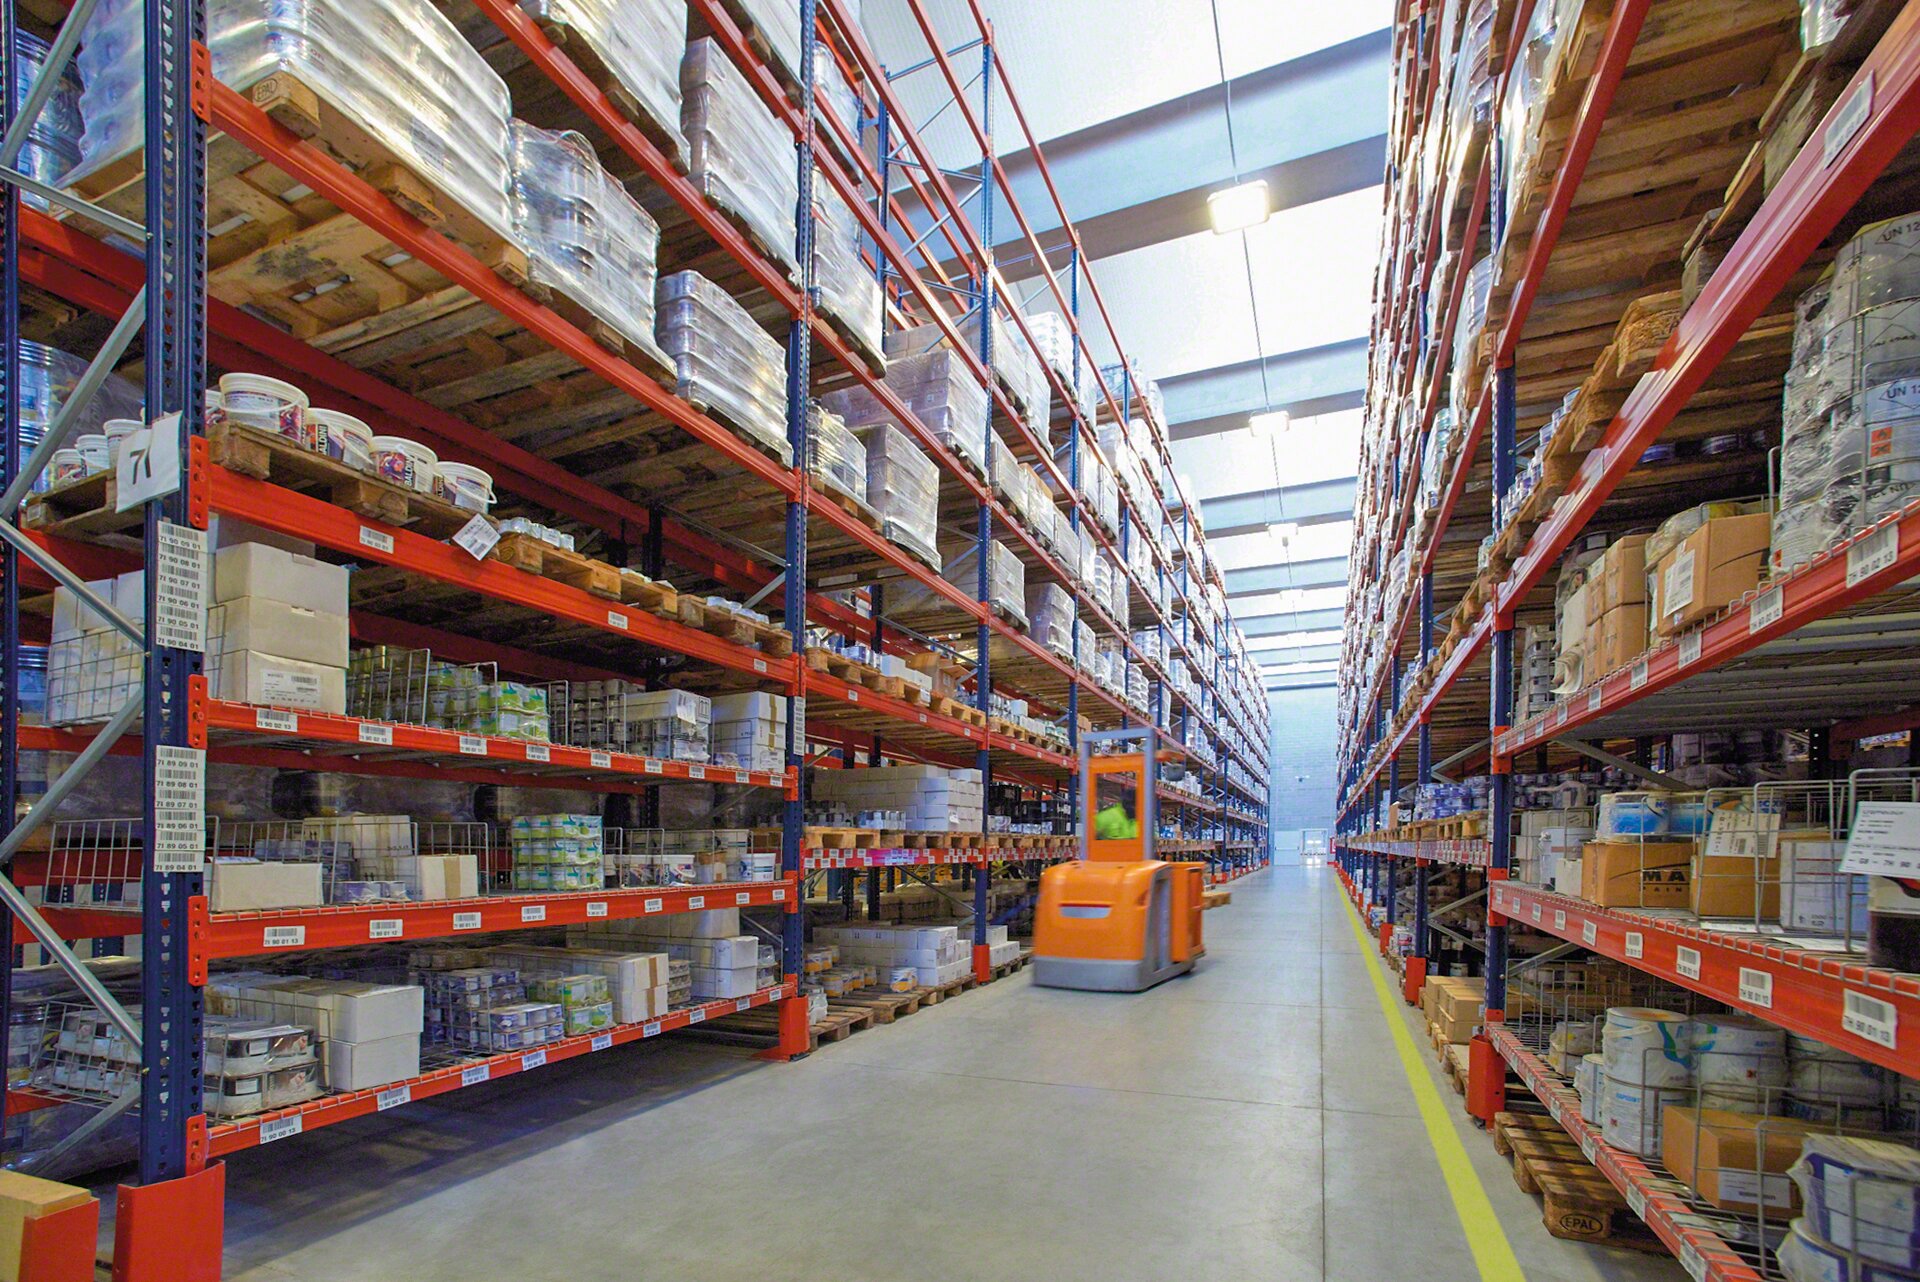 Combination of pallet racks in upper levels and picking racks in lower levels